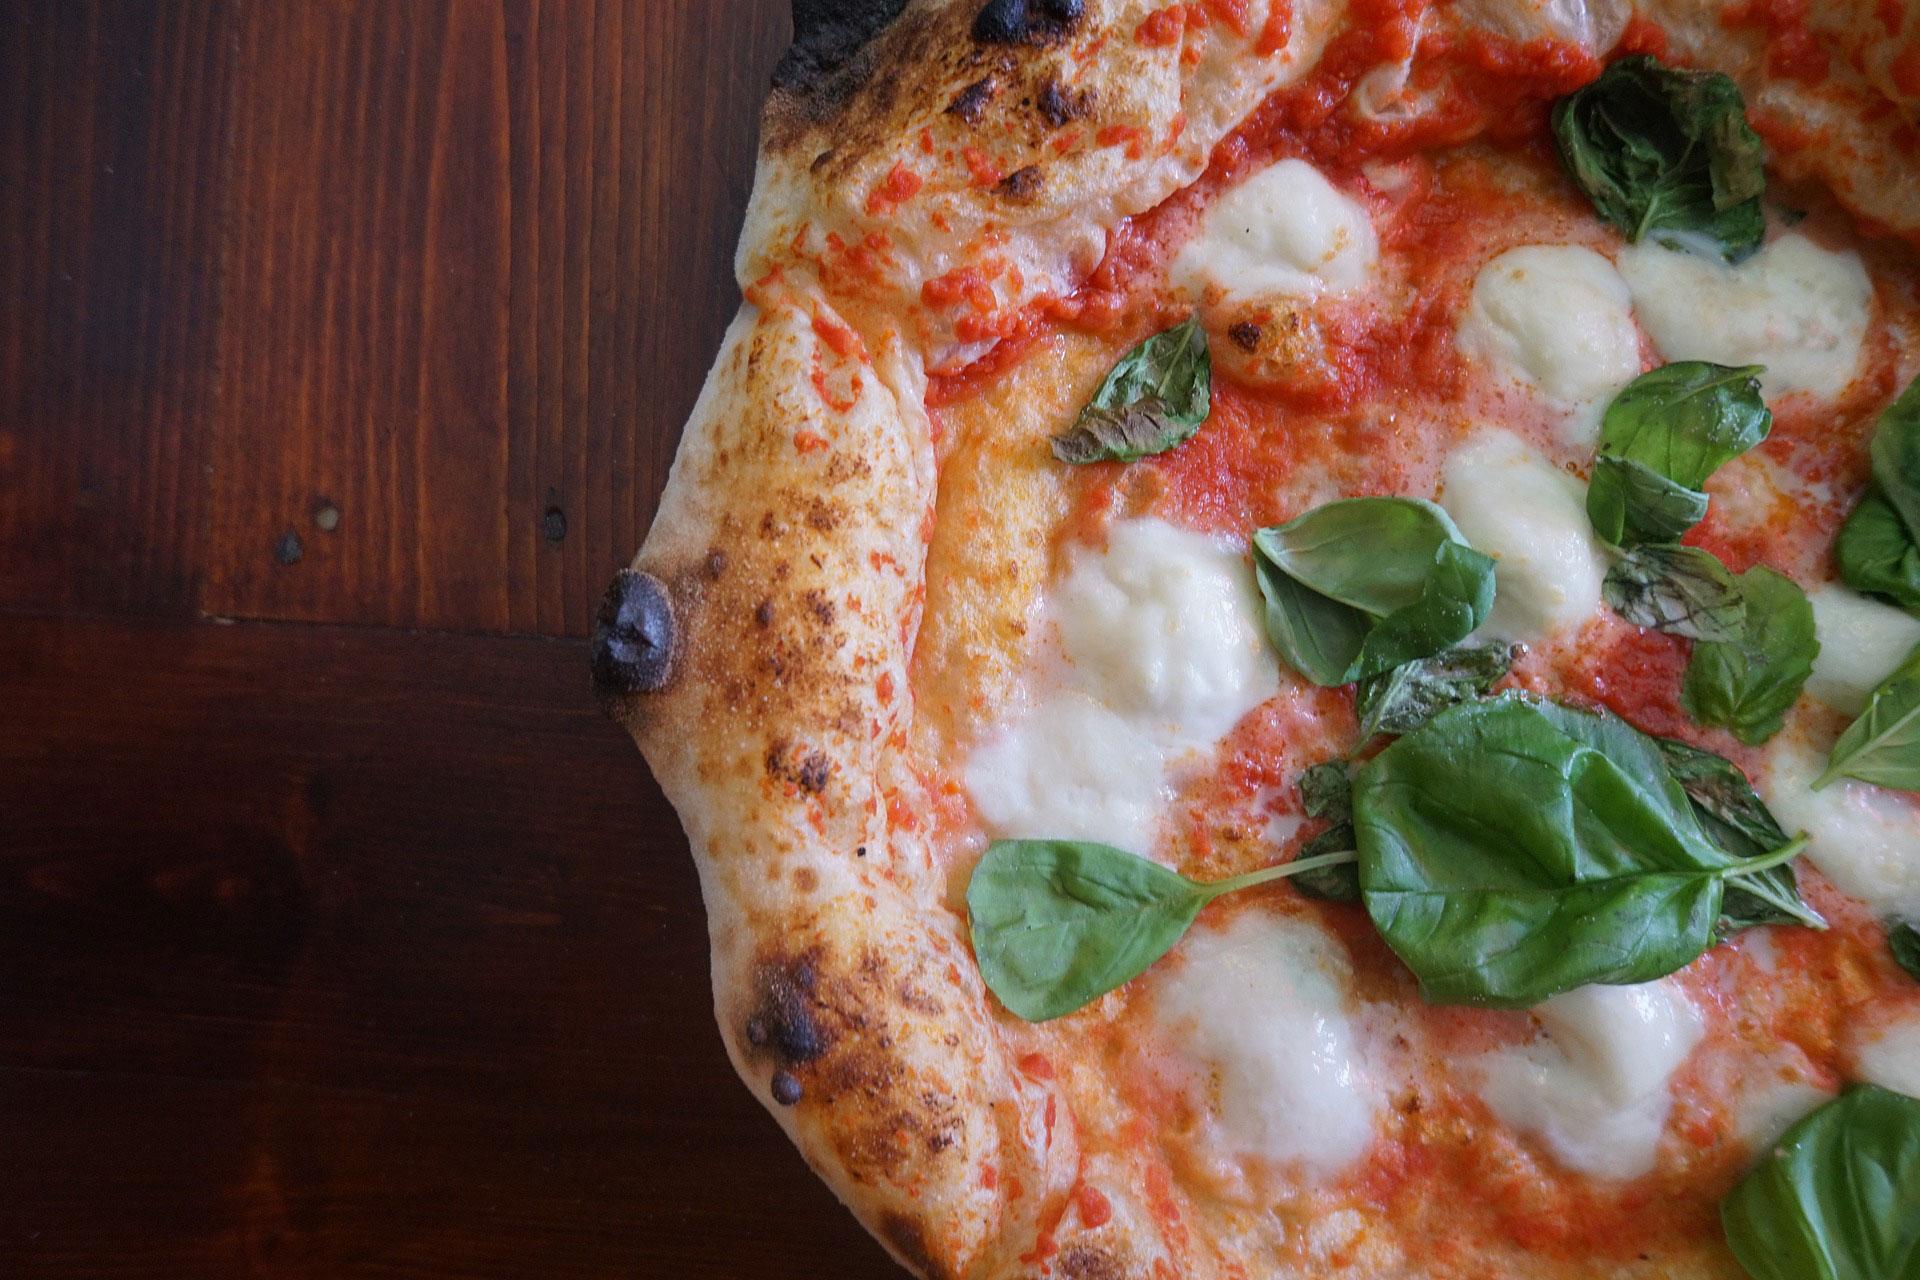 Where to eat the best pizzas in Nice